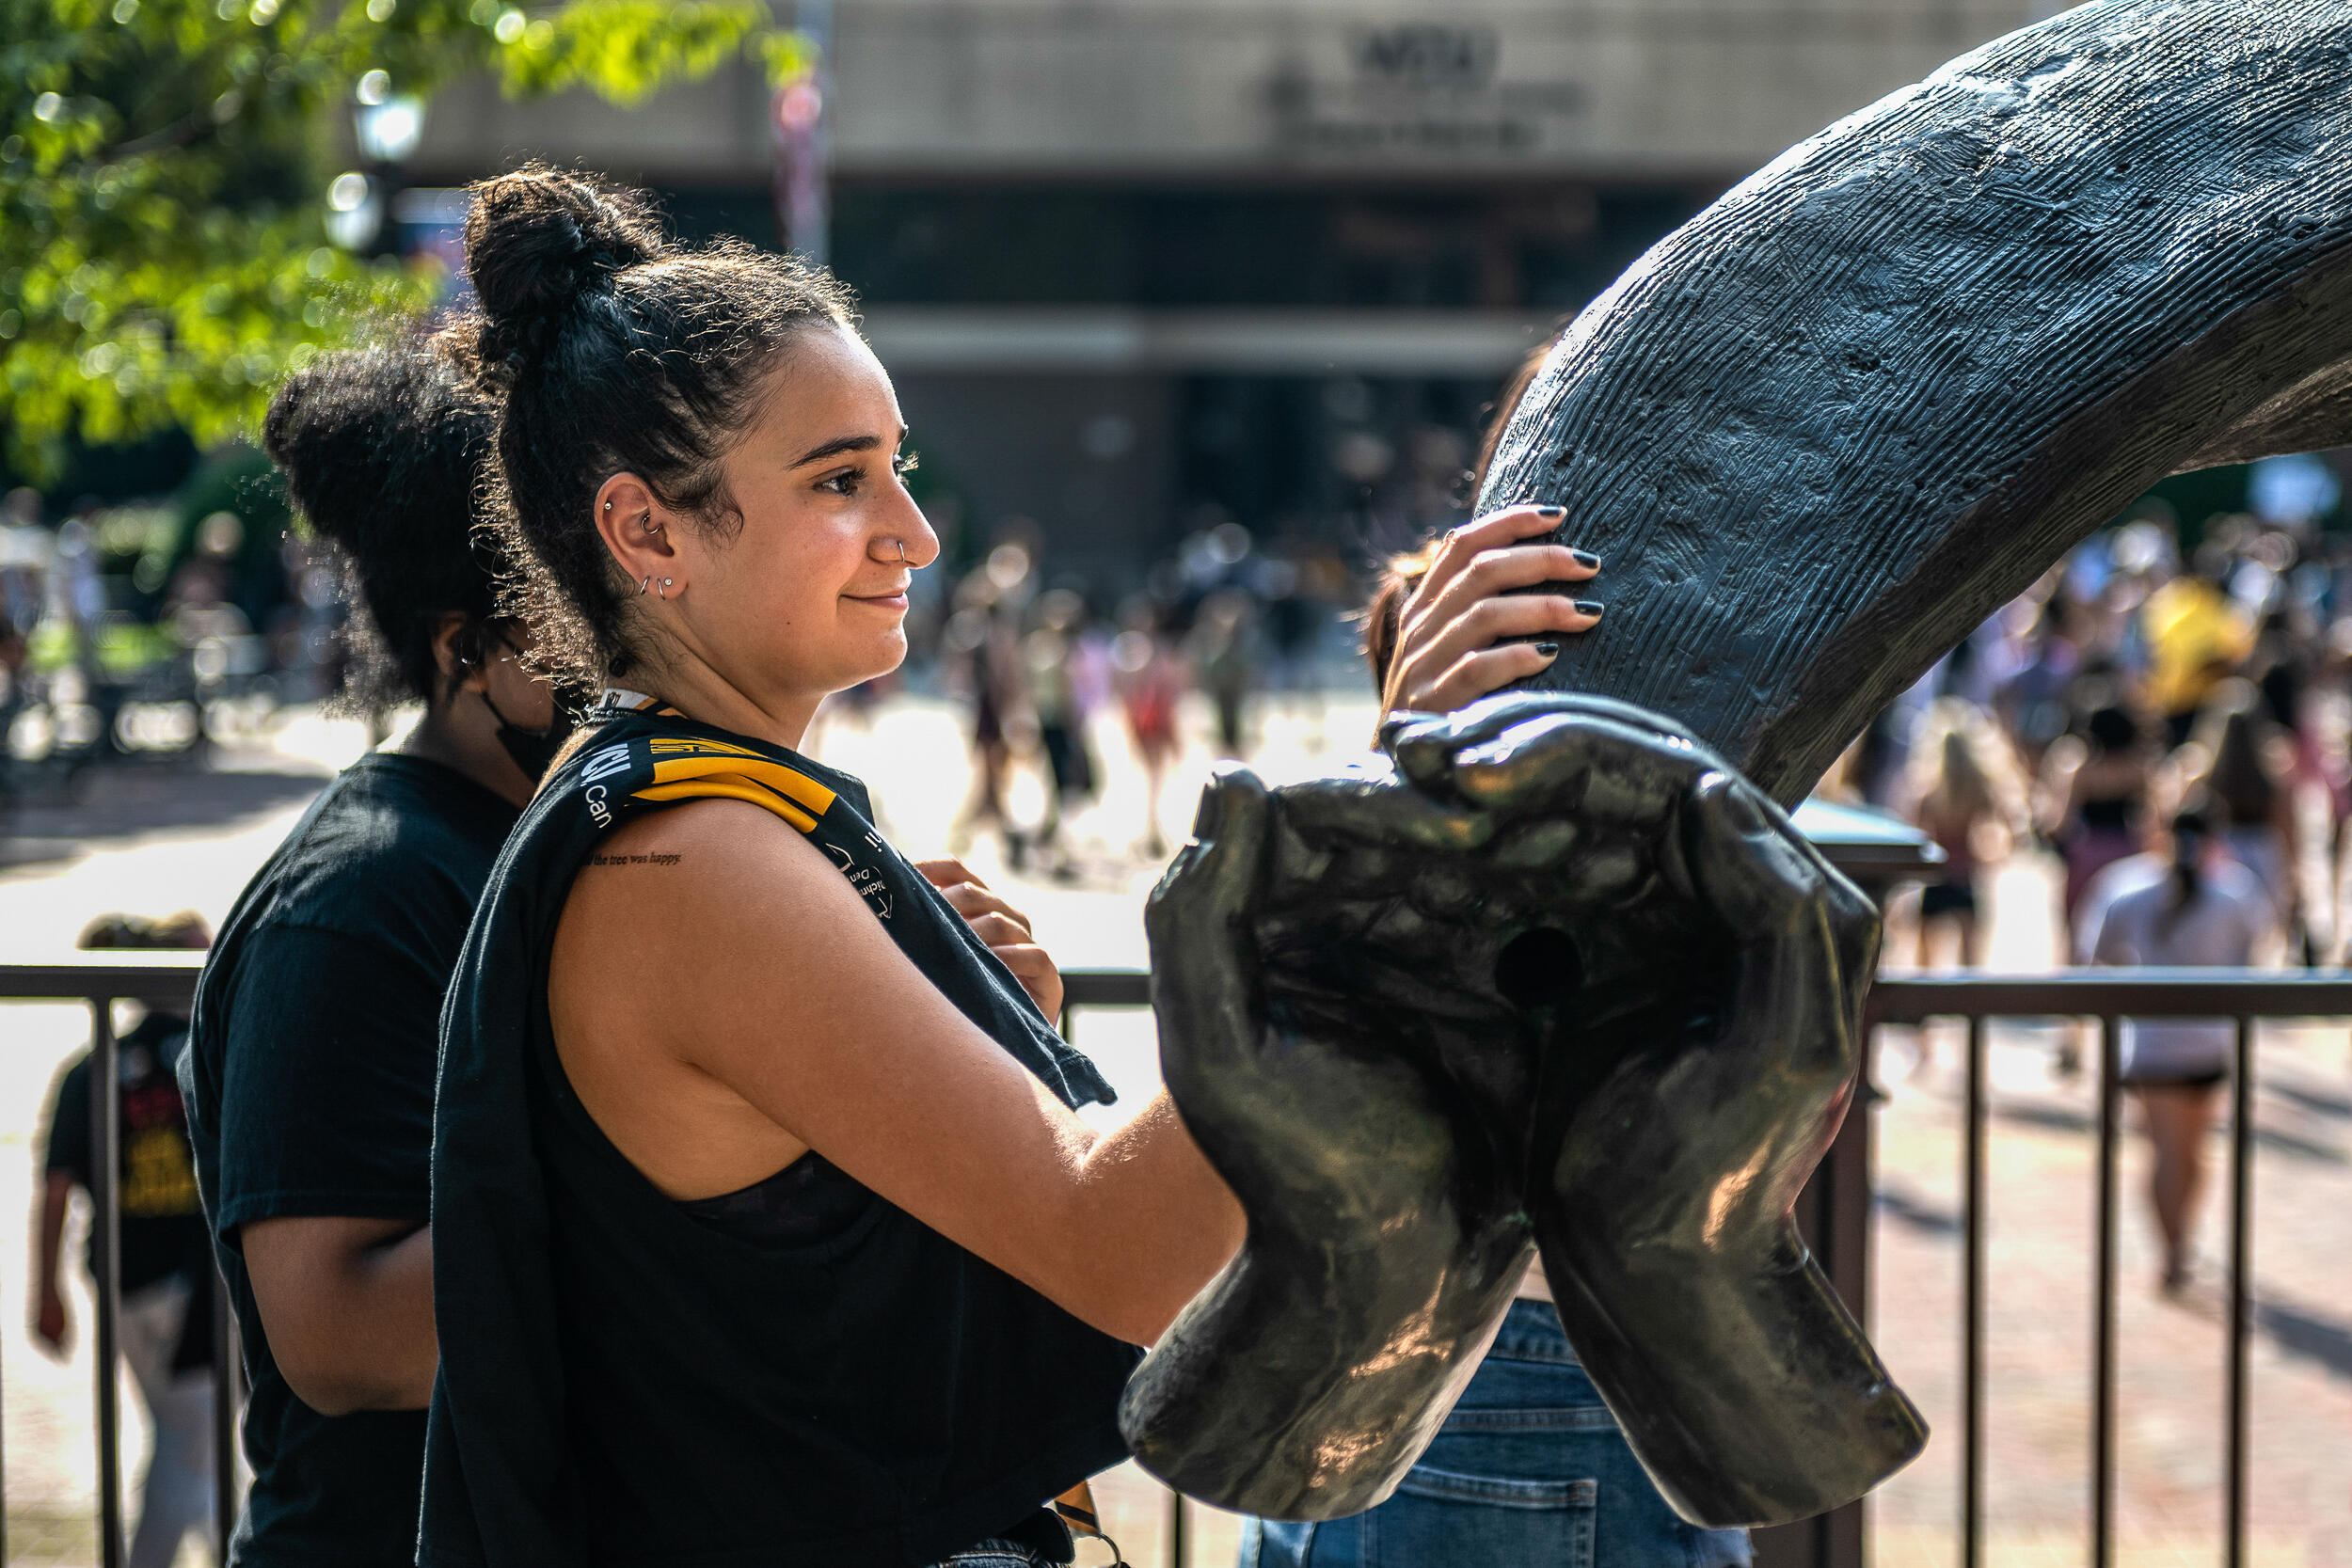 A student rests a hand on the Ram Horns outside The Commons in front of a plaza.